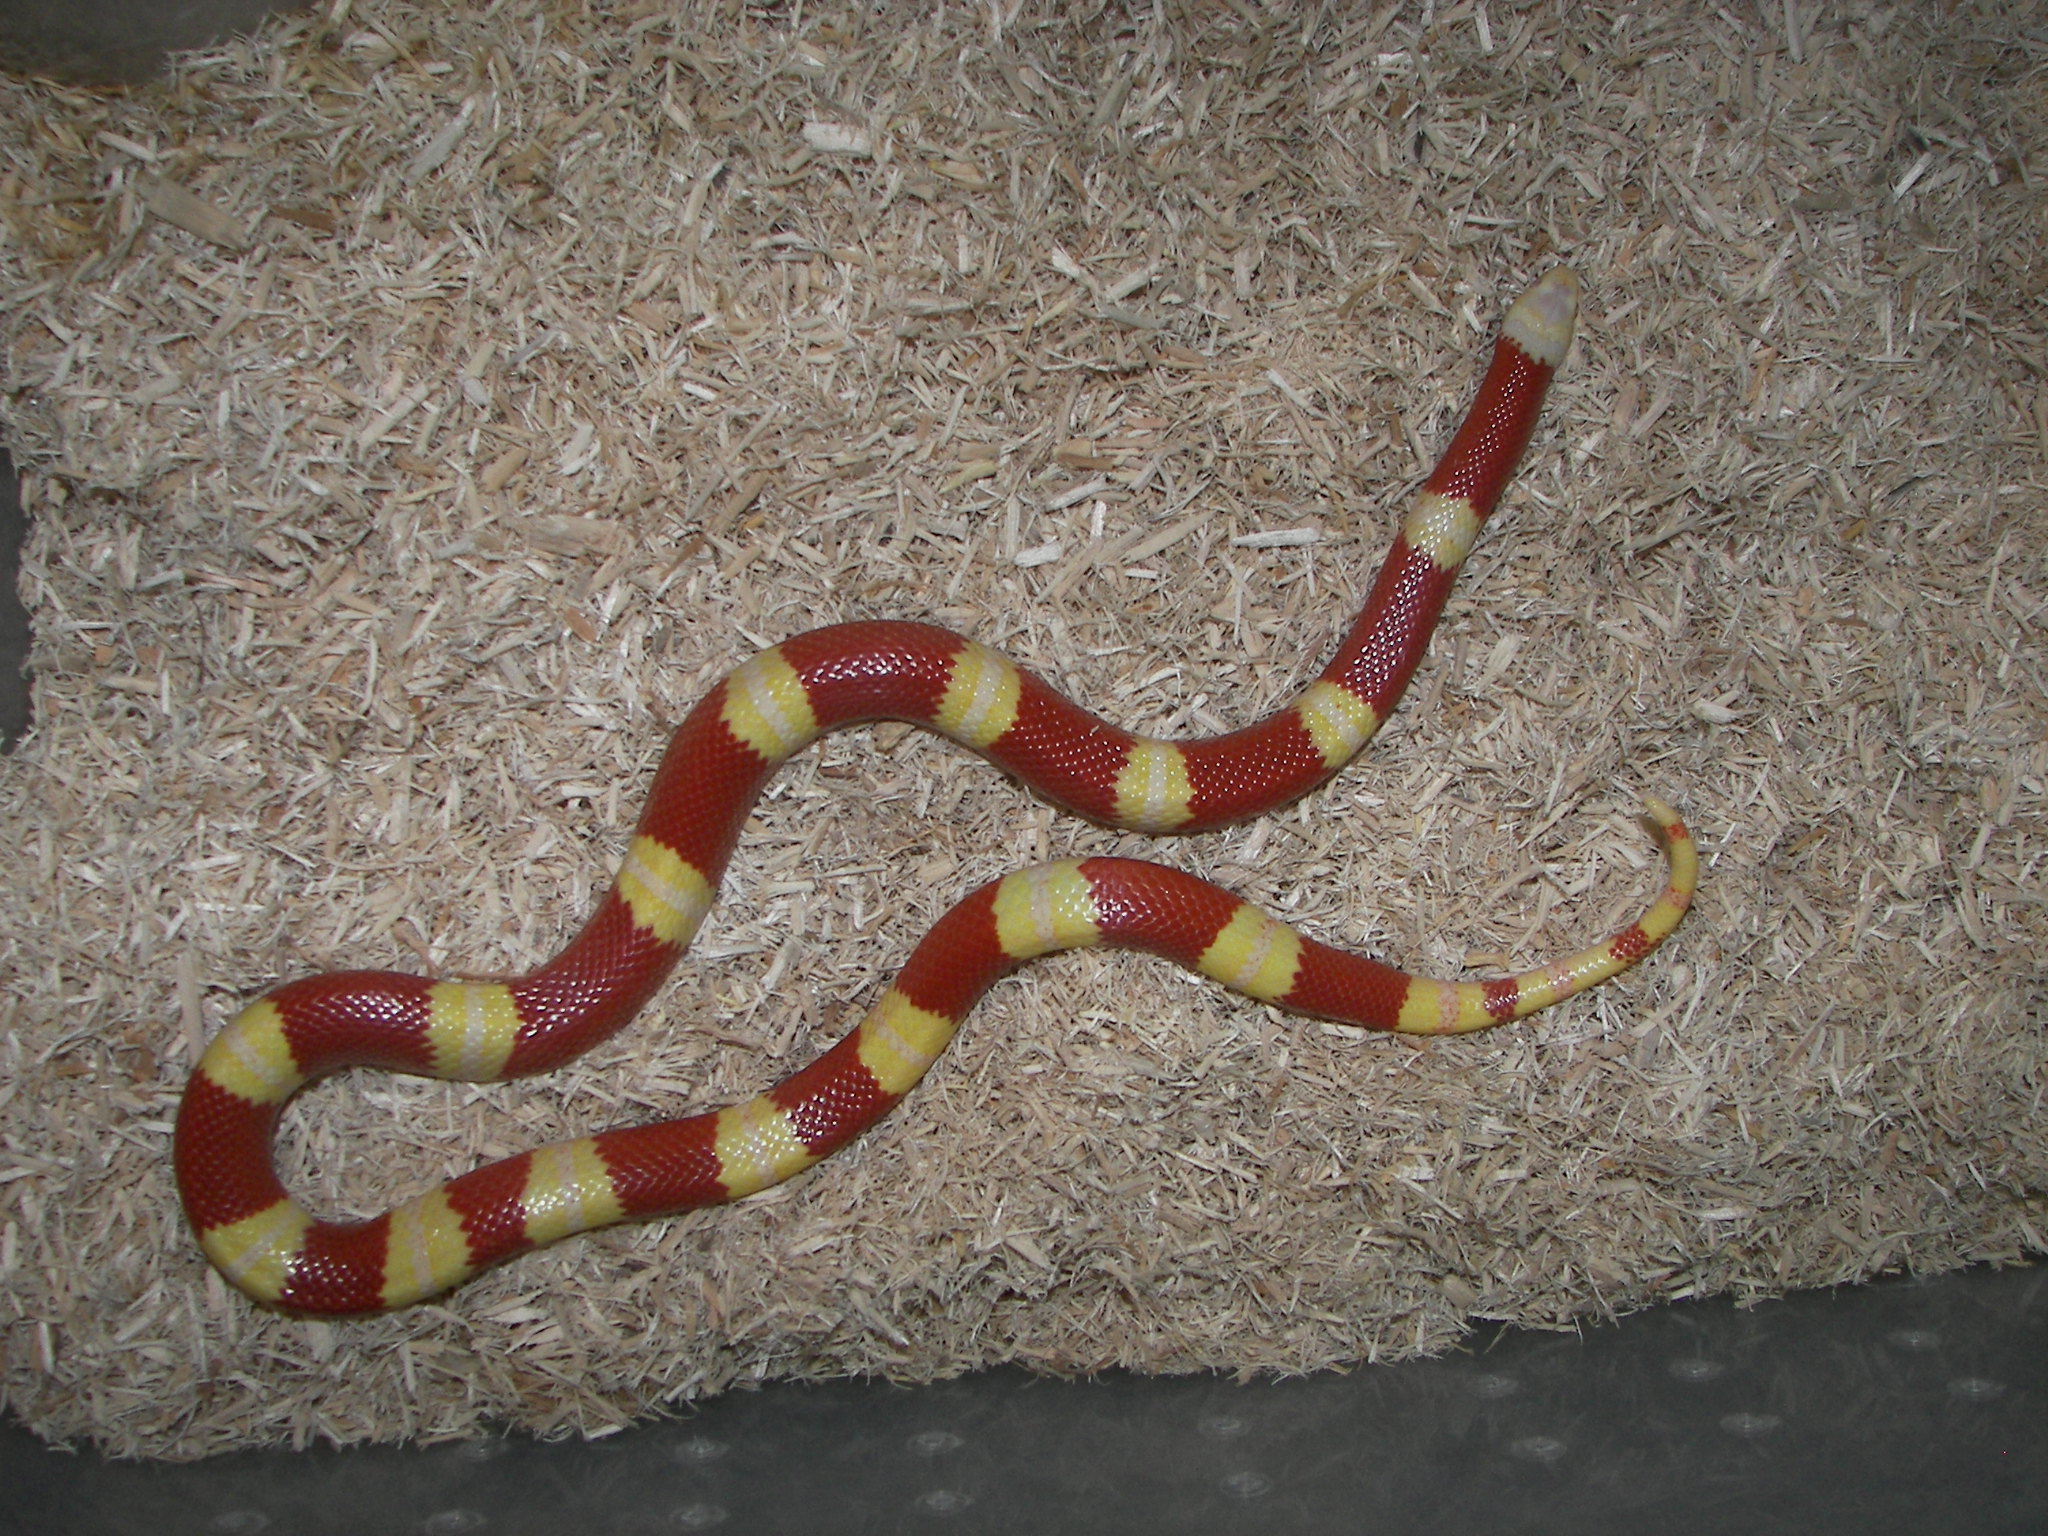 a snake that is on a piece of hay